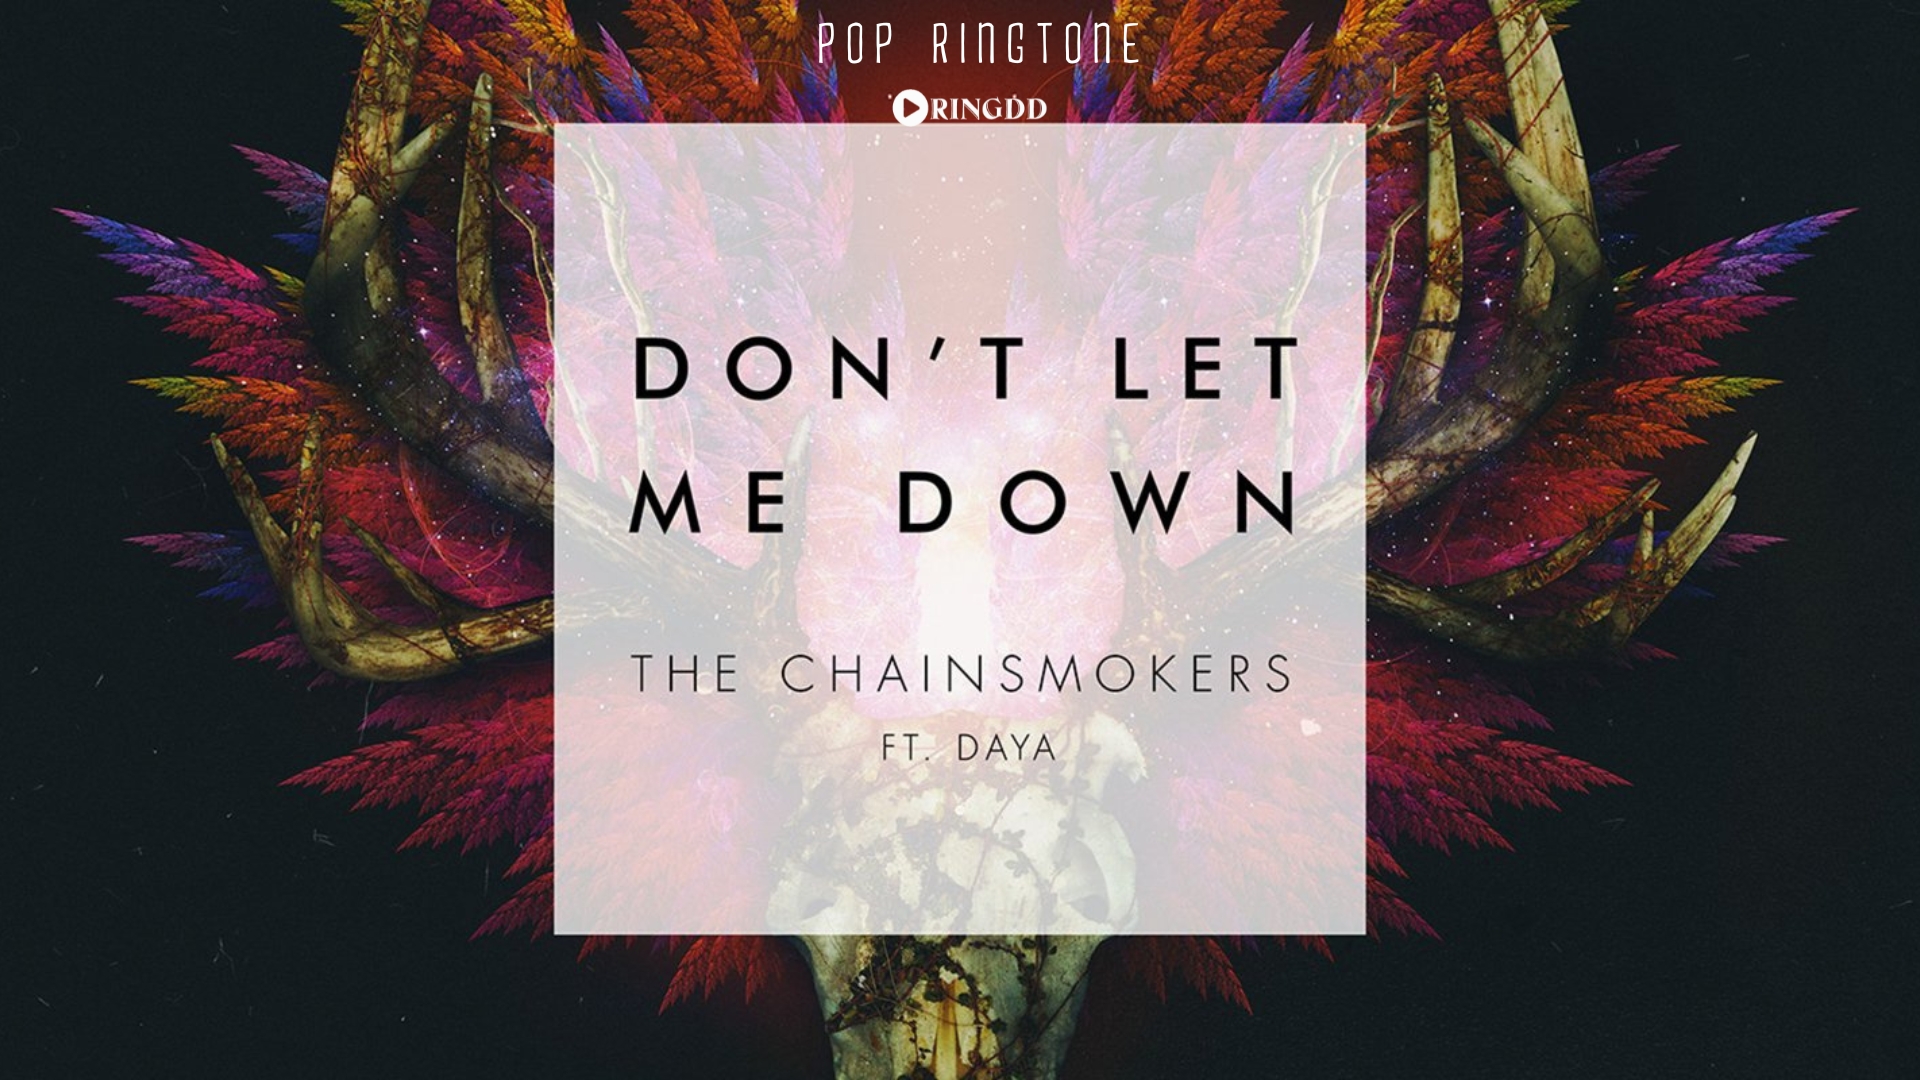 Don t object. Don`t Let me down. The Chainsmokers don't Let me down. The Chainsmokers Daya. Daya don't Let me down.